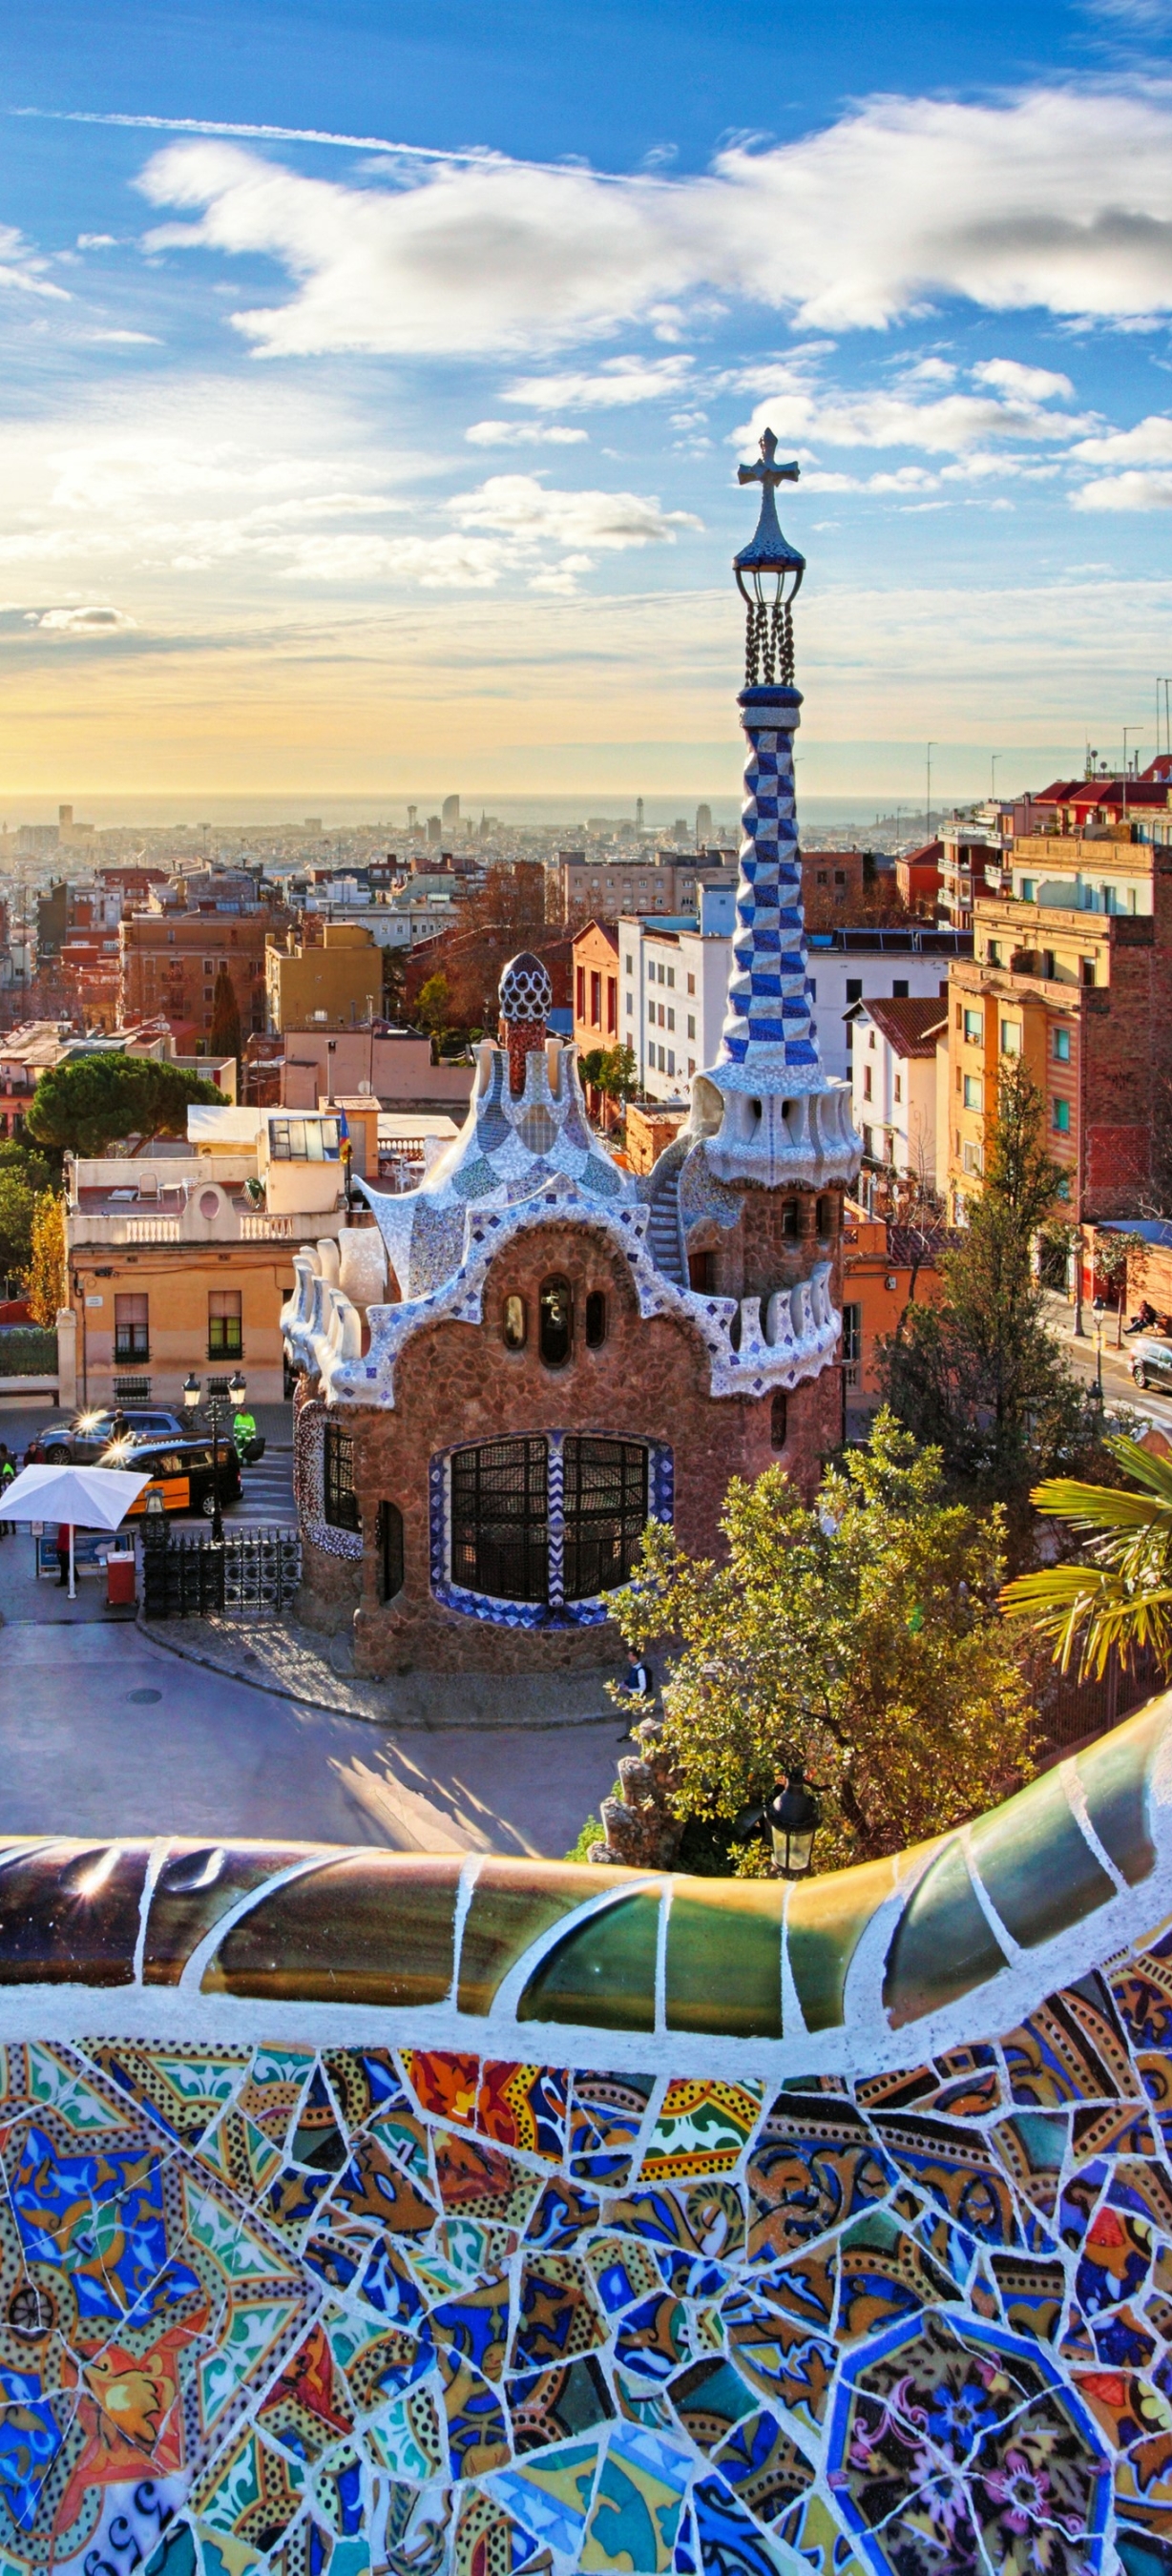 Barcelona City Photos Download The BEST Free Barcelona City Stock Photos   HD Images